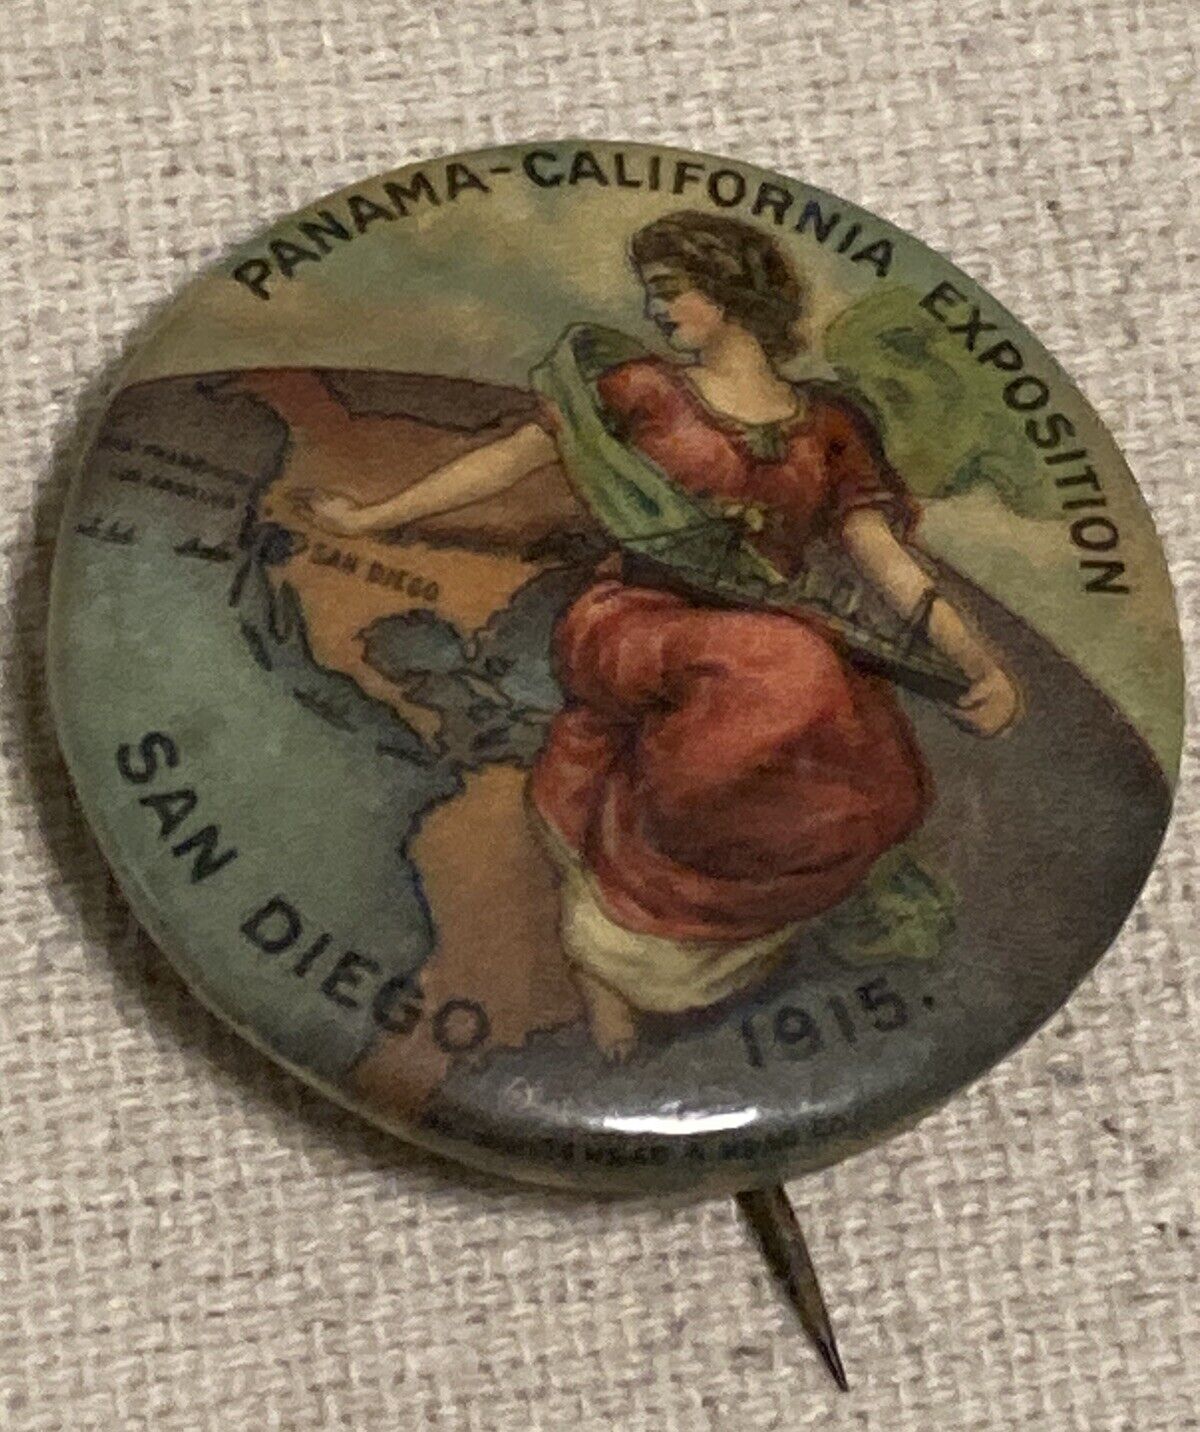 1915 Panama California Exposition San Diego Pin Button Panama Canal Int. Vintage